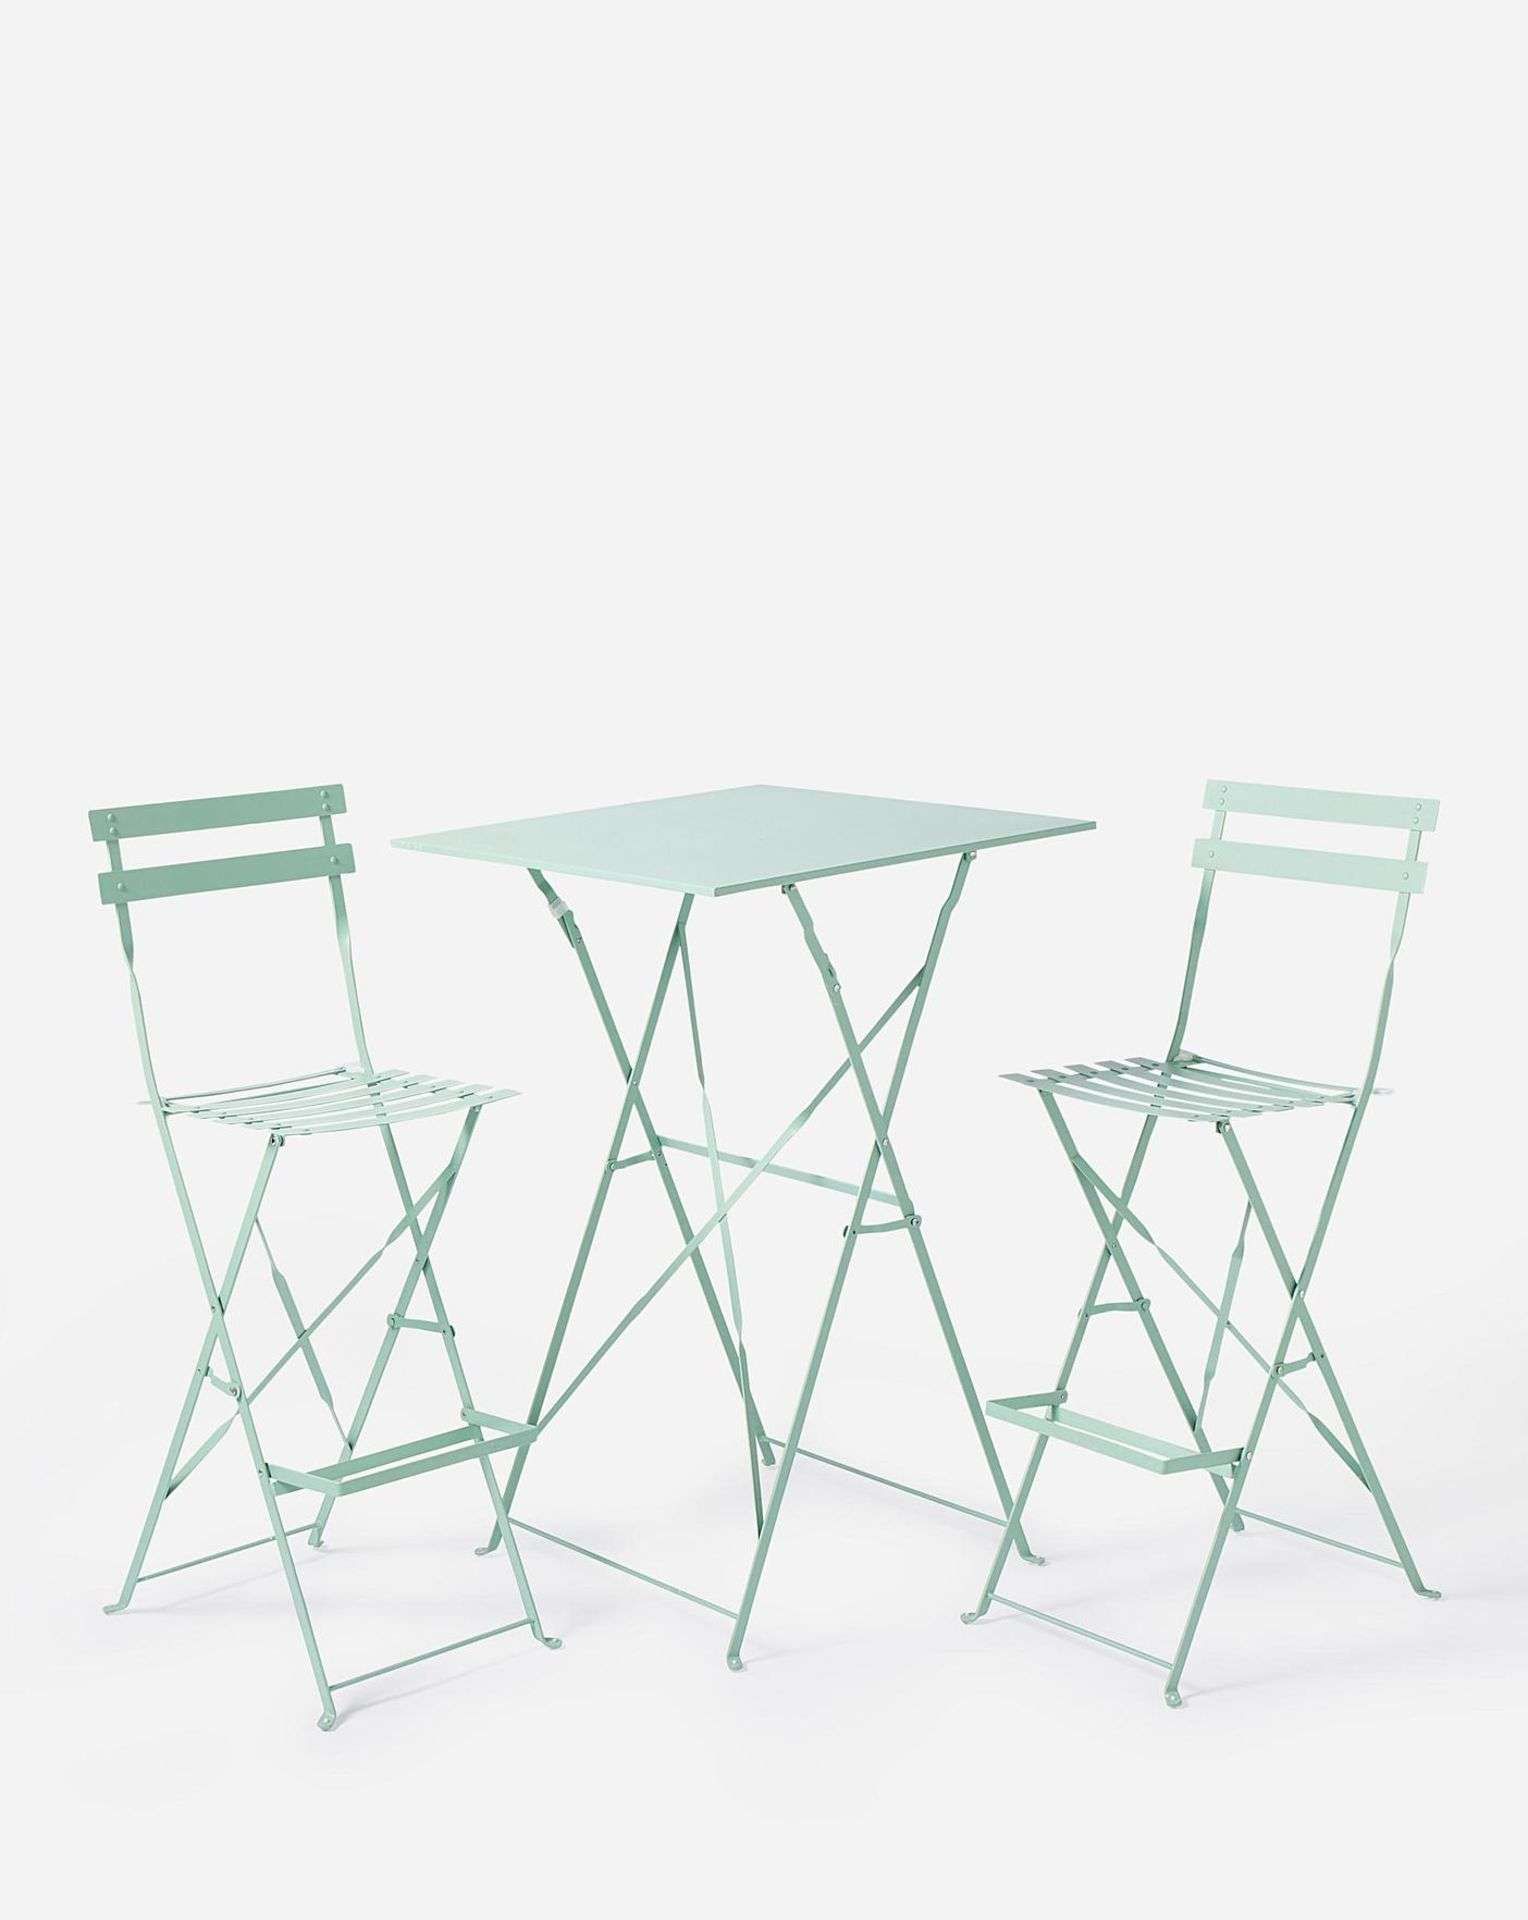 TRADE PALLET TO CONTAIN 6x BRAND NEW Palma Bistro Bar Set GREEN. RRP £159 EACH. Liven up your - Image 2 of 3